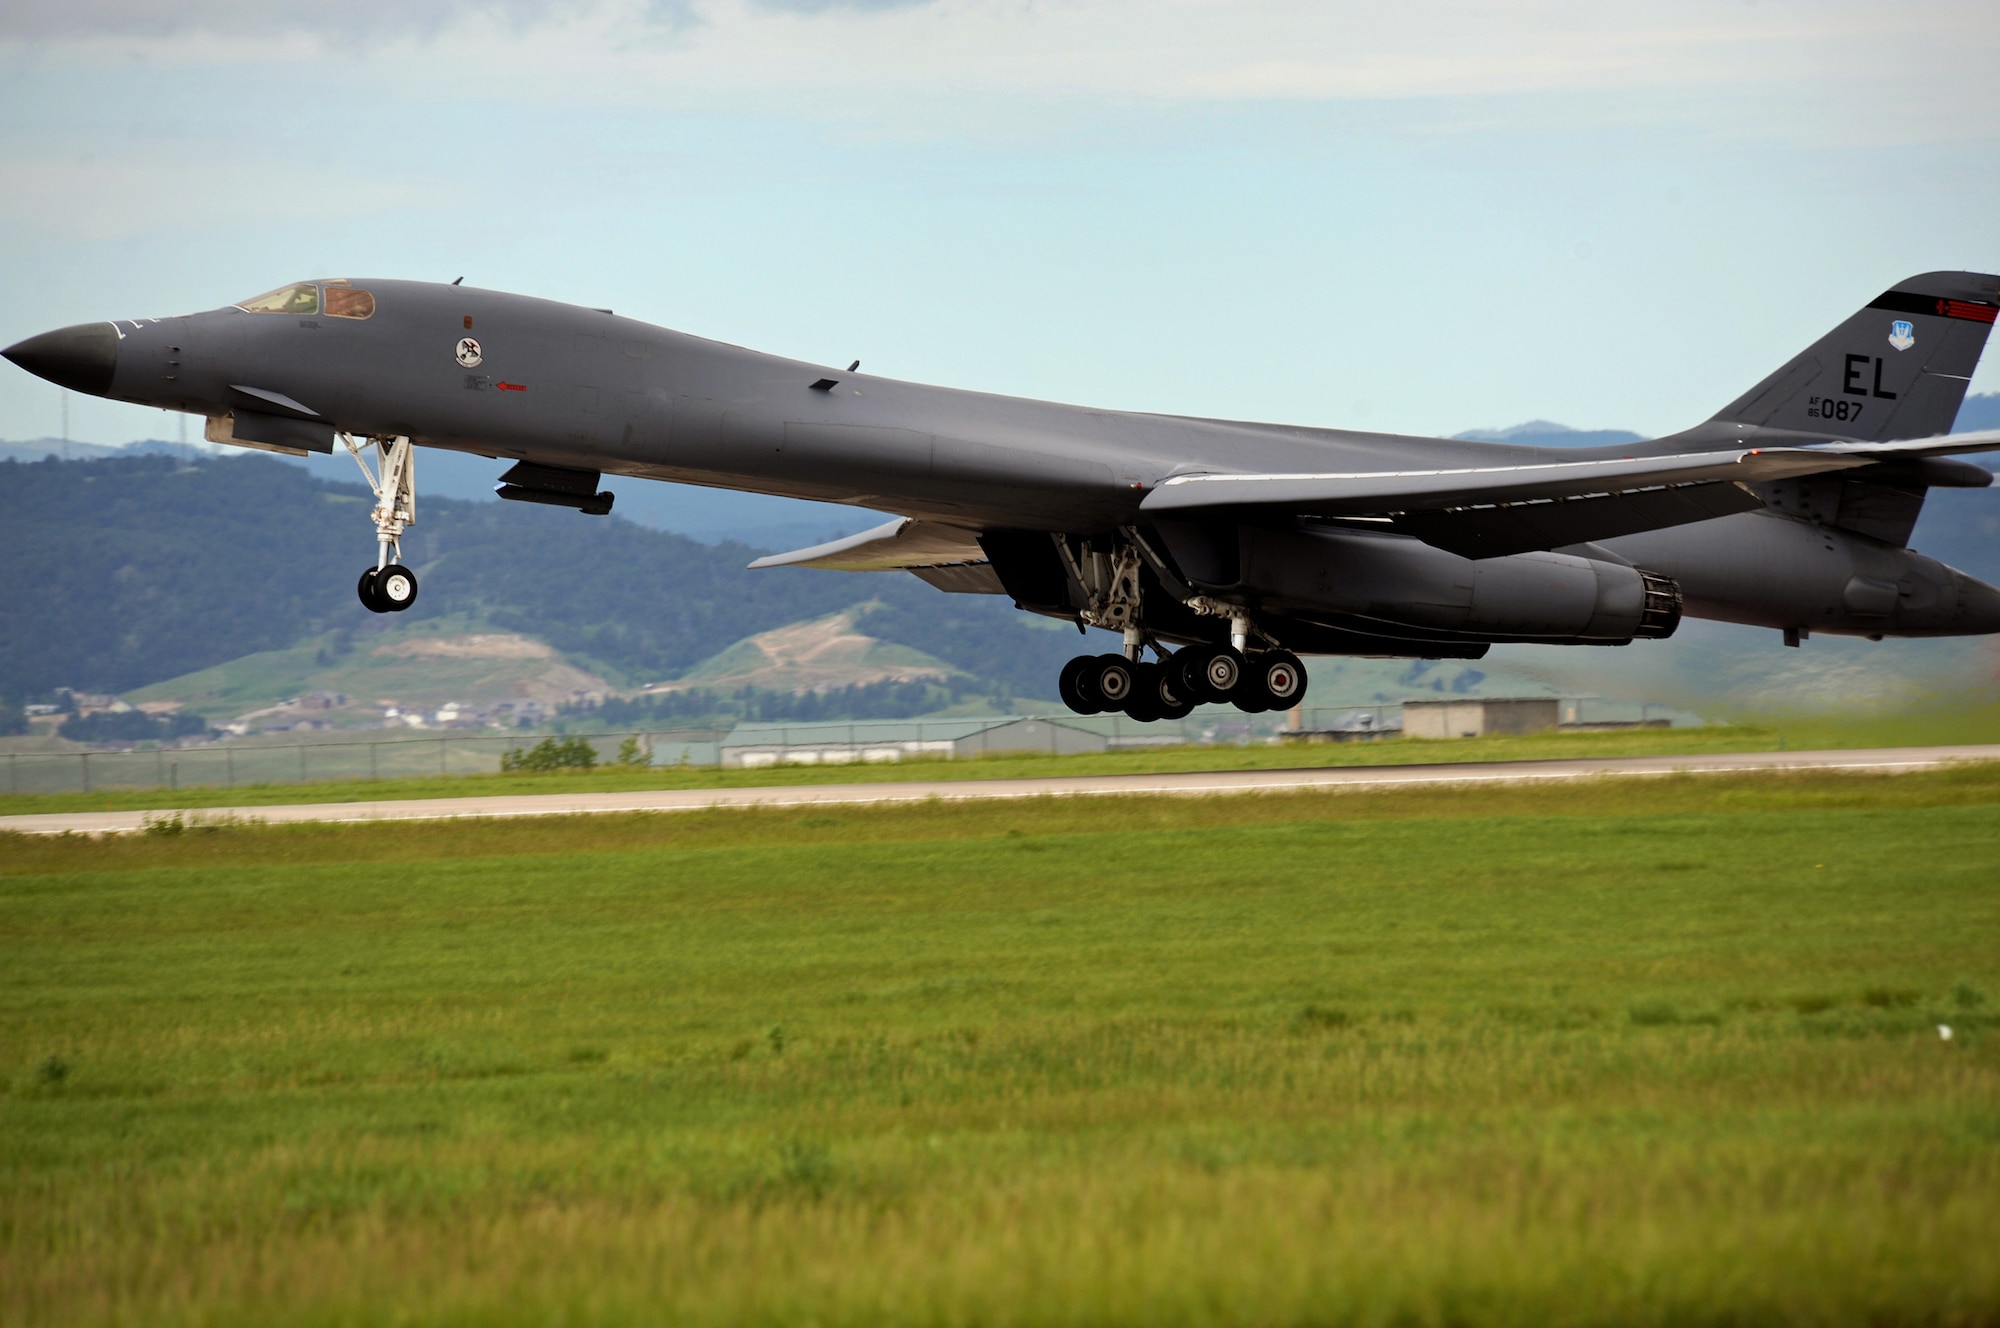 The first 28th Bomb Wing B-1B Lancer equipped with a Sniper Advanced Targeting Pod takes off of the flight line, June 10. The Sniper ATP is a long-range precision targeting system that supports strike missions by providing positive target identification, autonomous tracking, coordinate generation and accurate weapons guidance from extended standoff ranges. (U.S. Air Force photo/Senior Airman Marc I. Lane)
